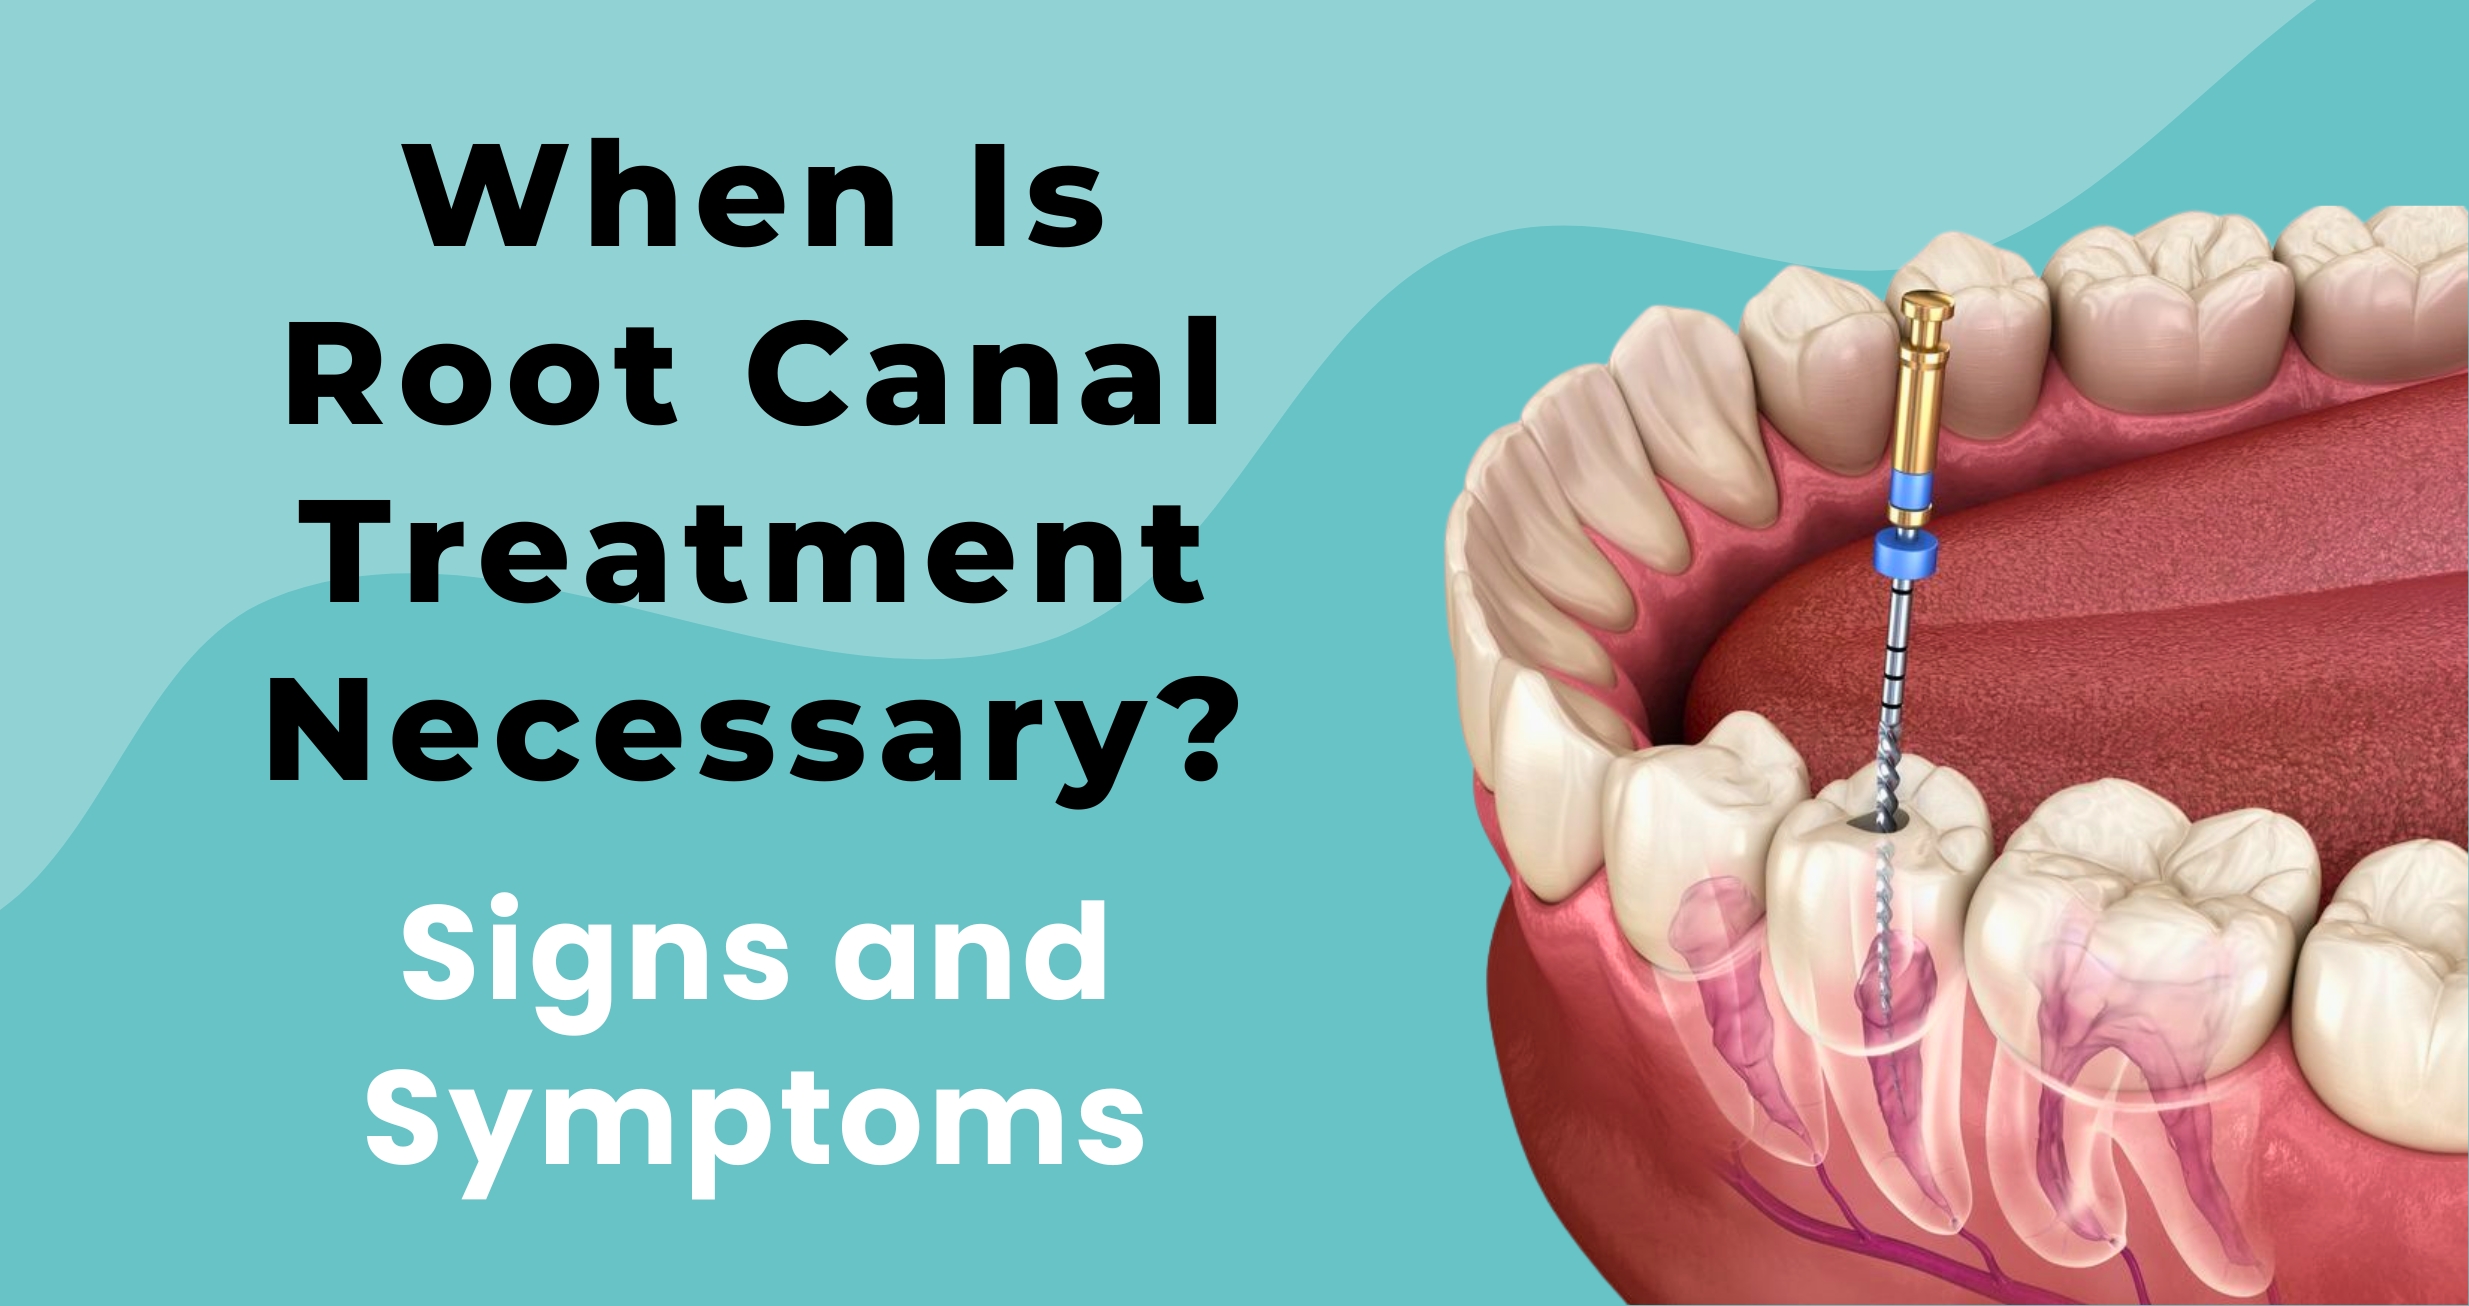 When Is Root Canal Treatment Necessary? Signs and Symptoms